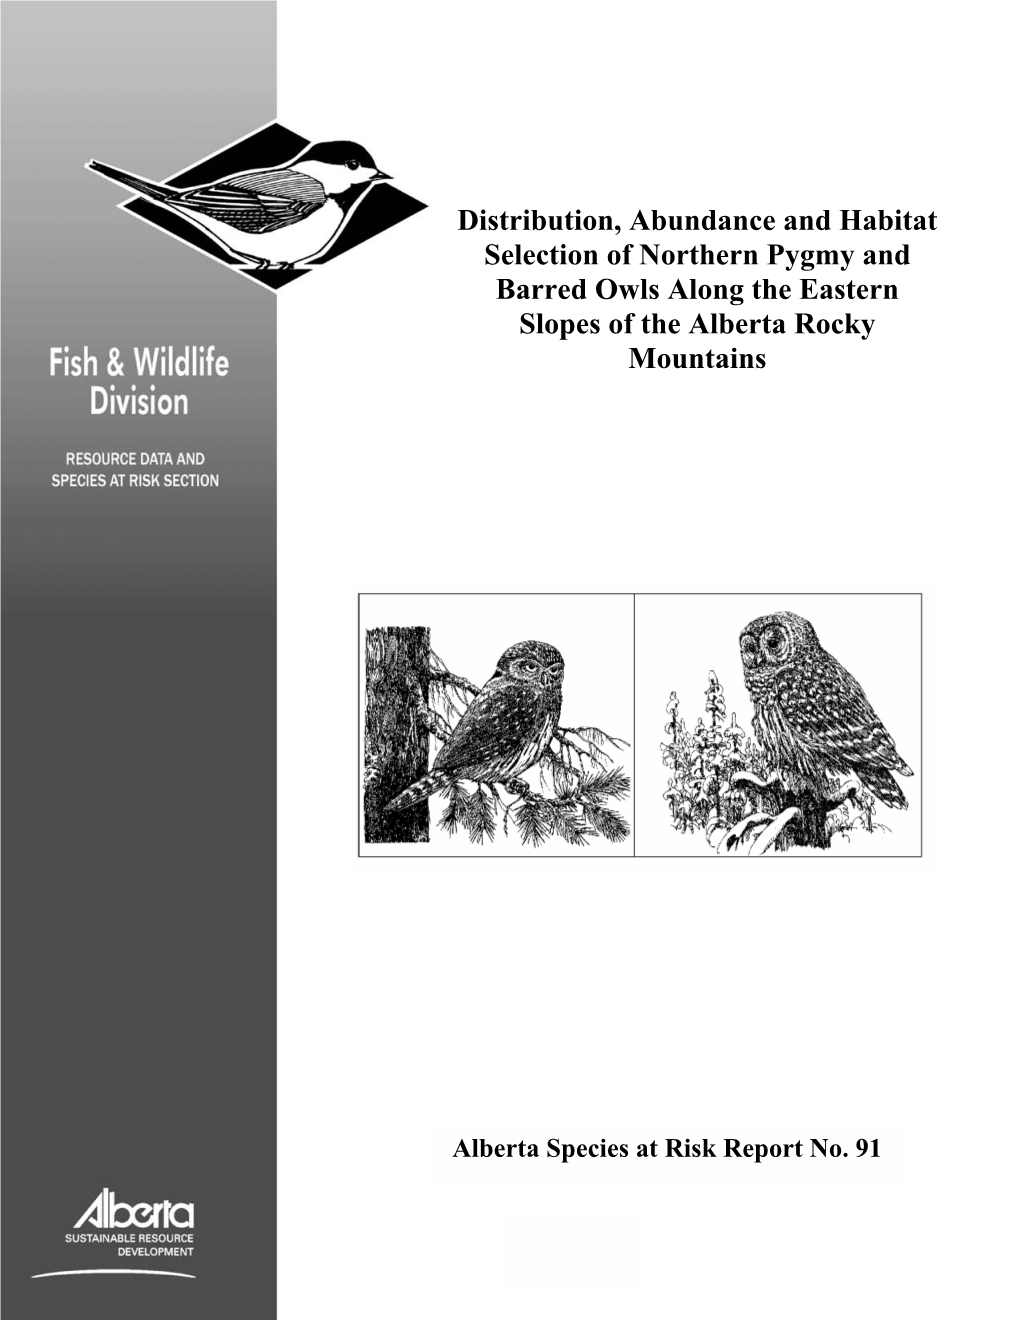 Distribution, Abundance and Habitat Selection of Northern Pygmy and Barred Owls Along the Eastern Slopes of the Alberta Rocky Mountains